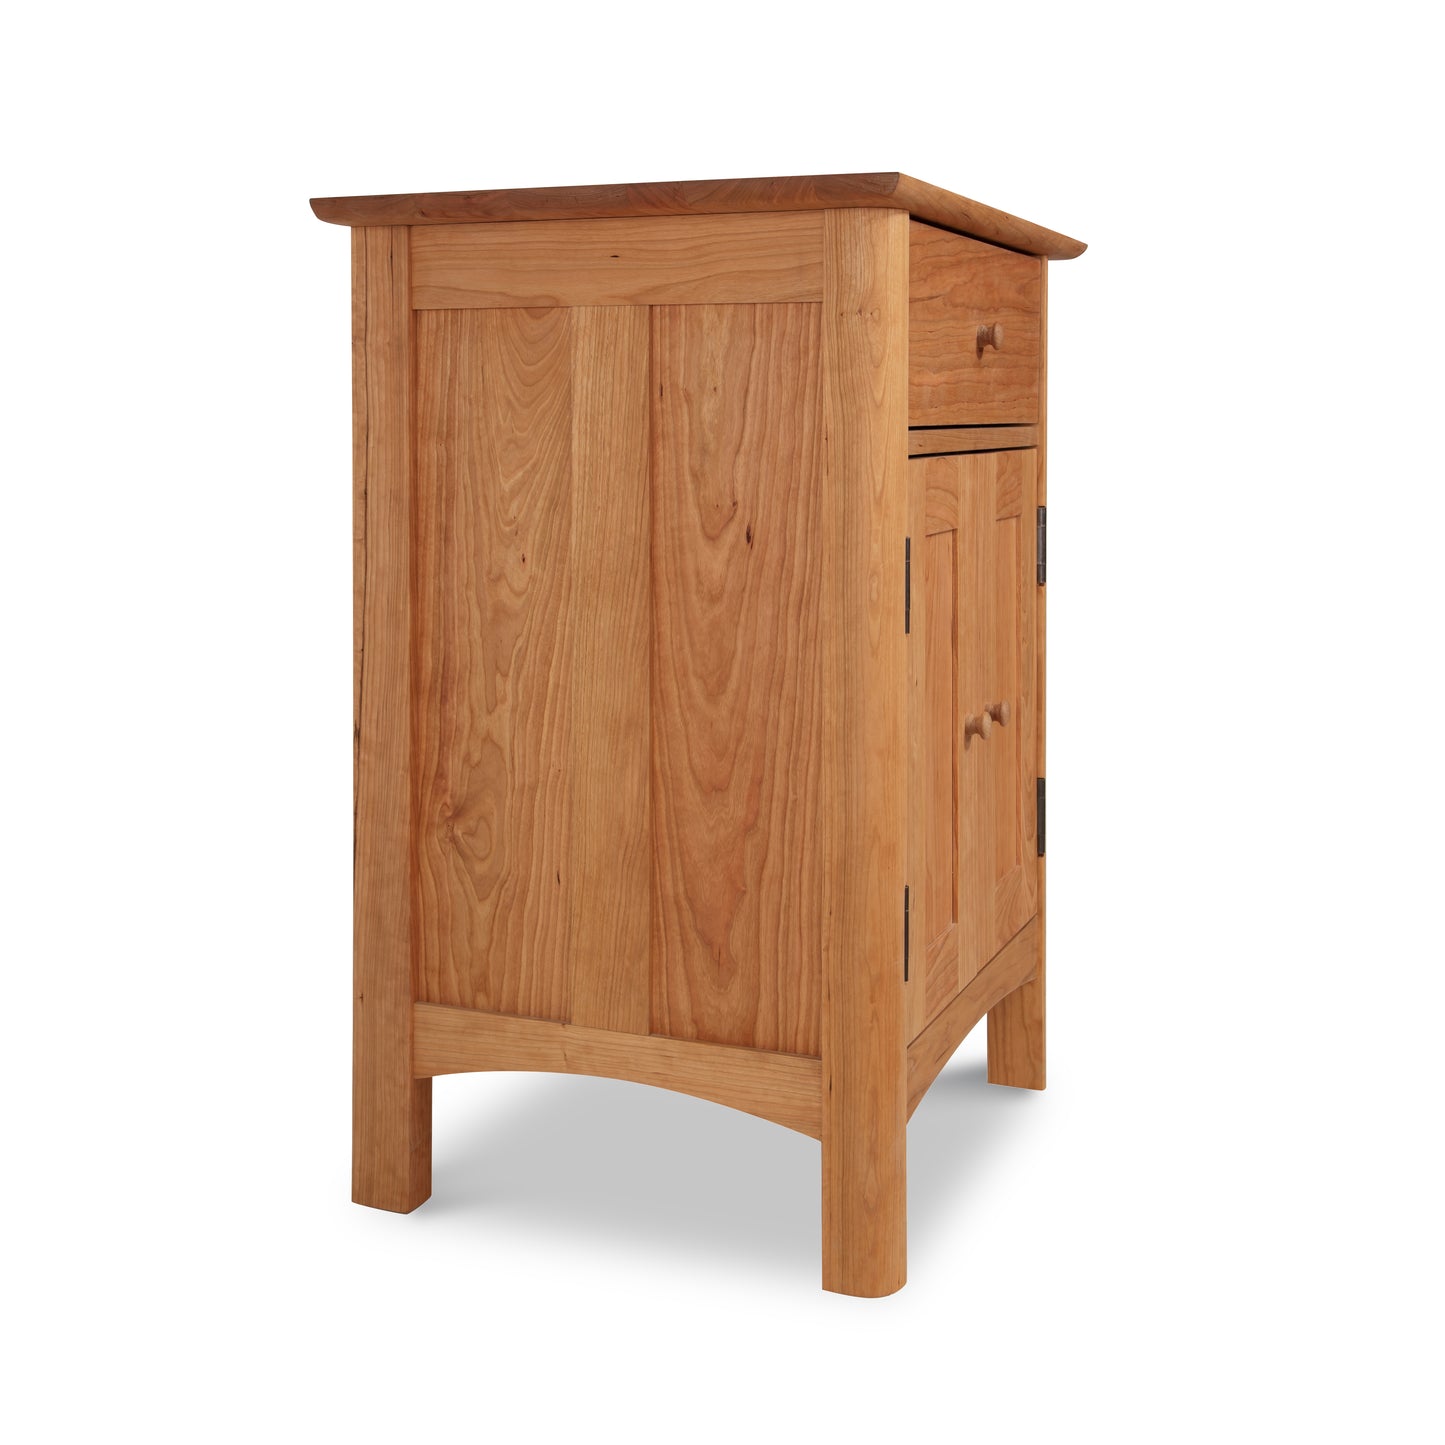 A wooden nightstand with two drawers and a door.